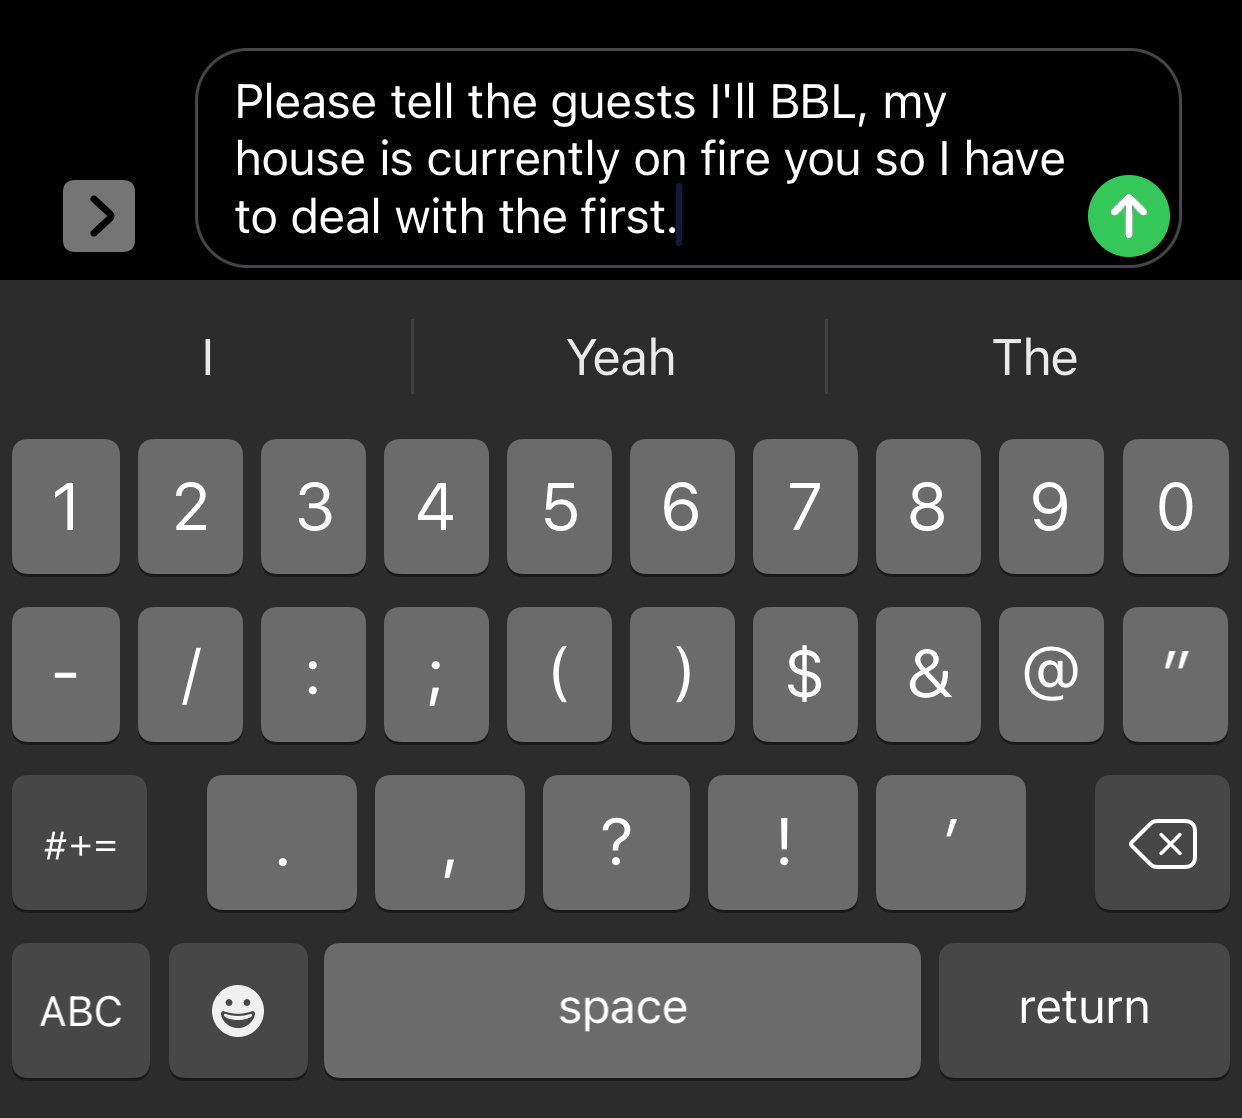 An example of the initialism BBL in a text message.